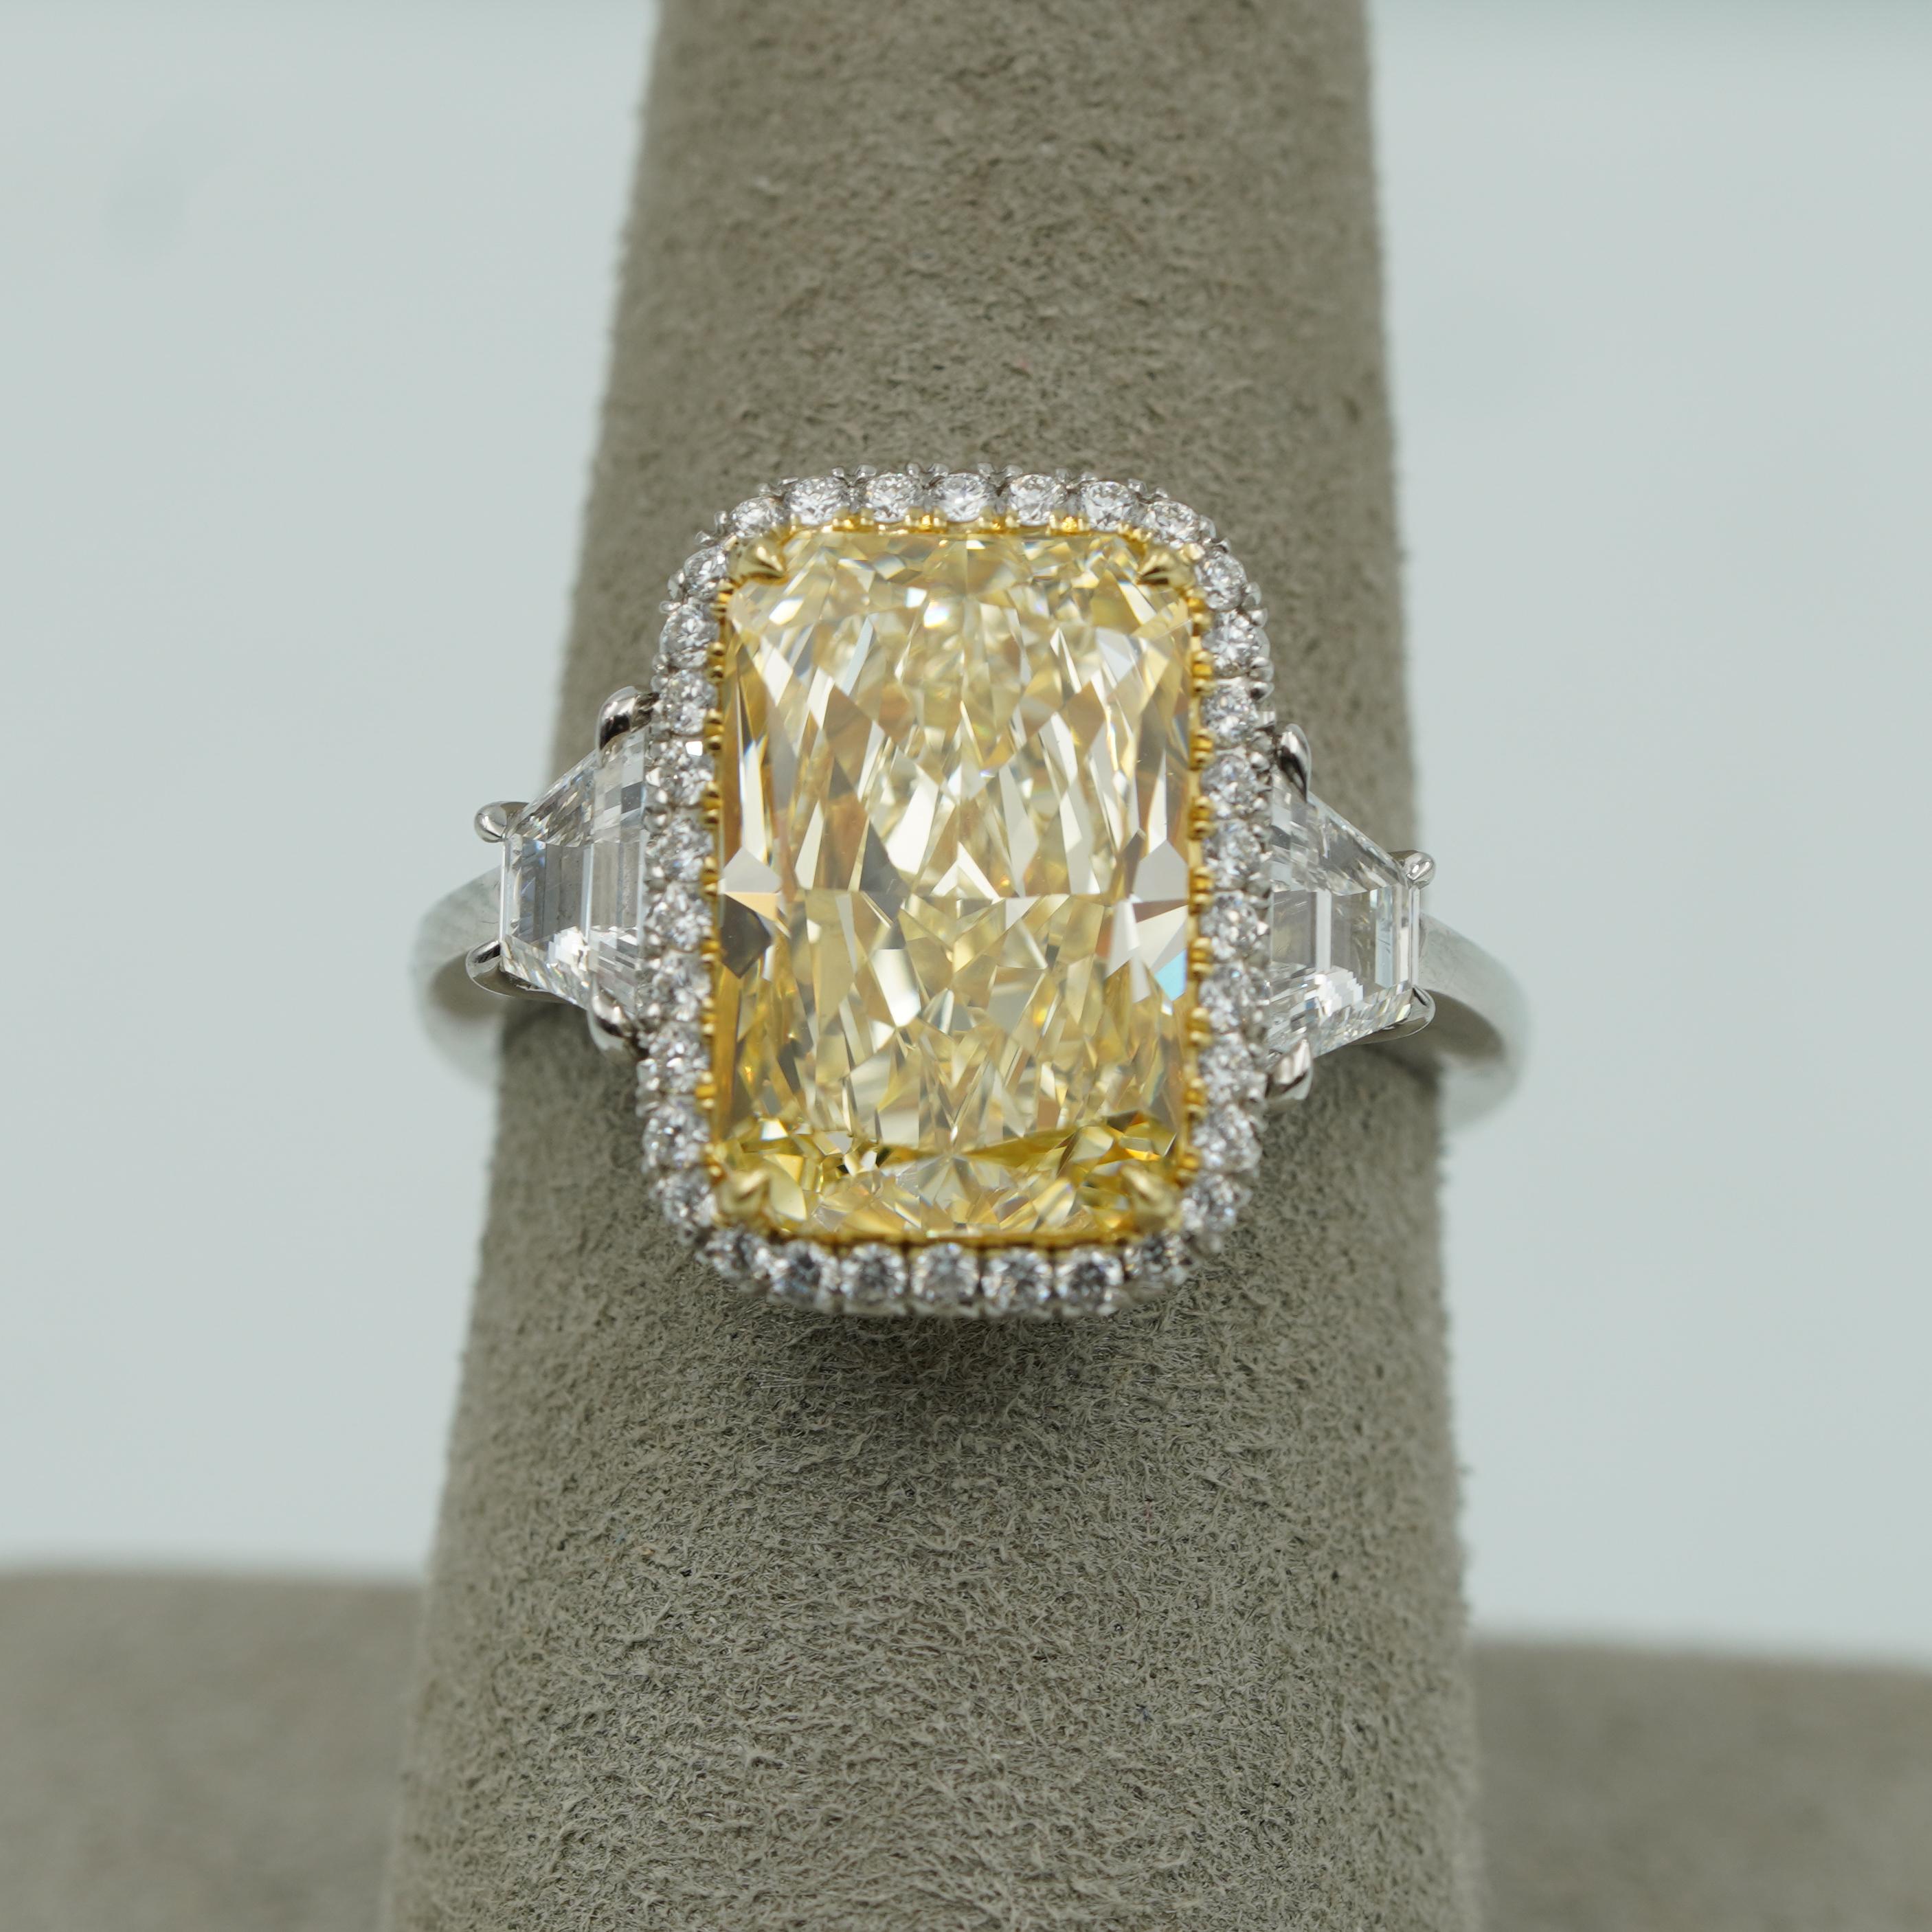 6.03ct Fancy Yellow Radiant Cut Diamond Rahaminov 18K & Platinum Ring  In New Condition For Sale In Carmel, IN